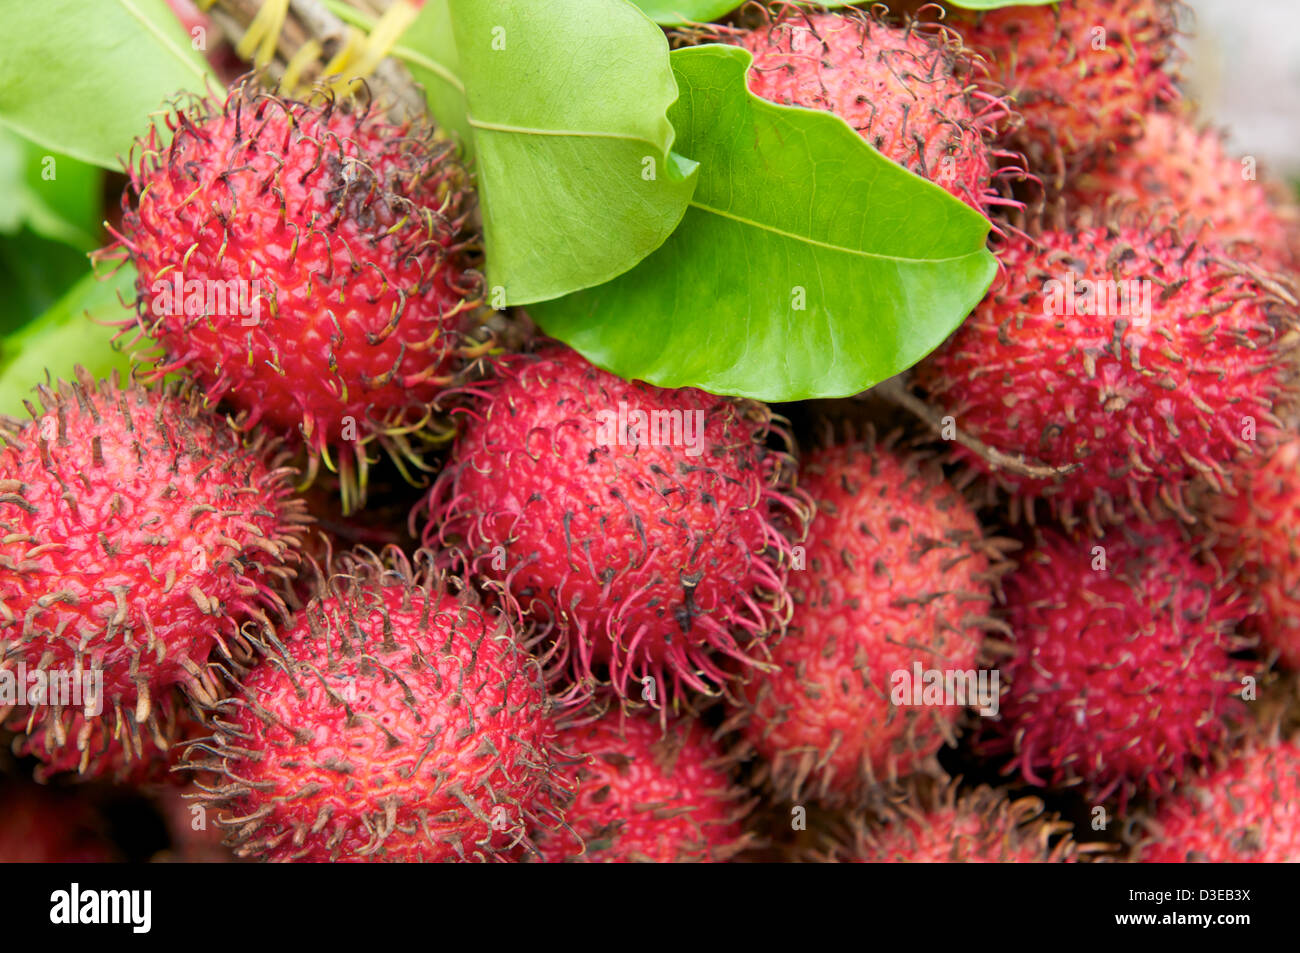 Rambutan is a kind of tropical fruit with a sweet flavor. Stock Photo